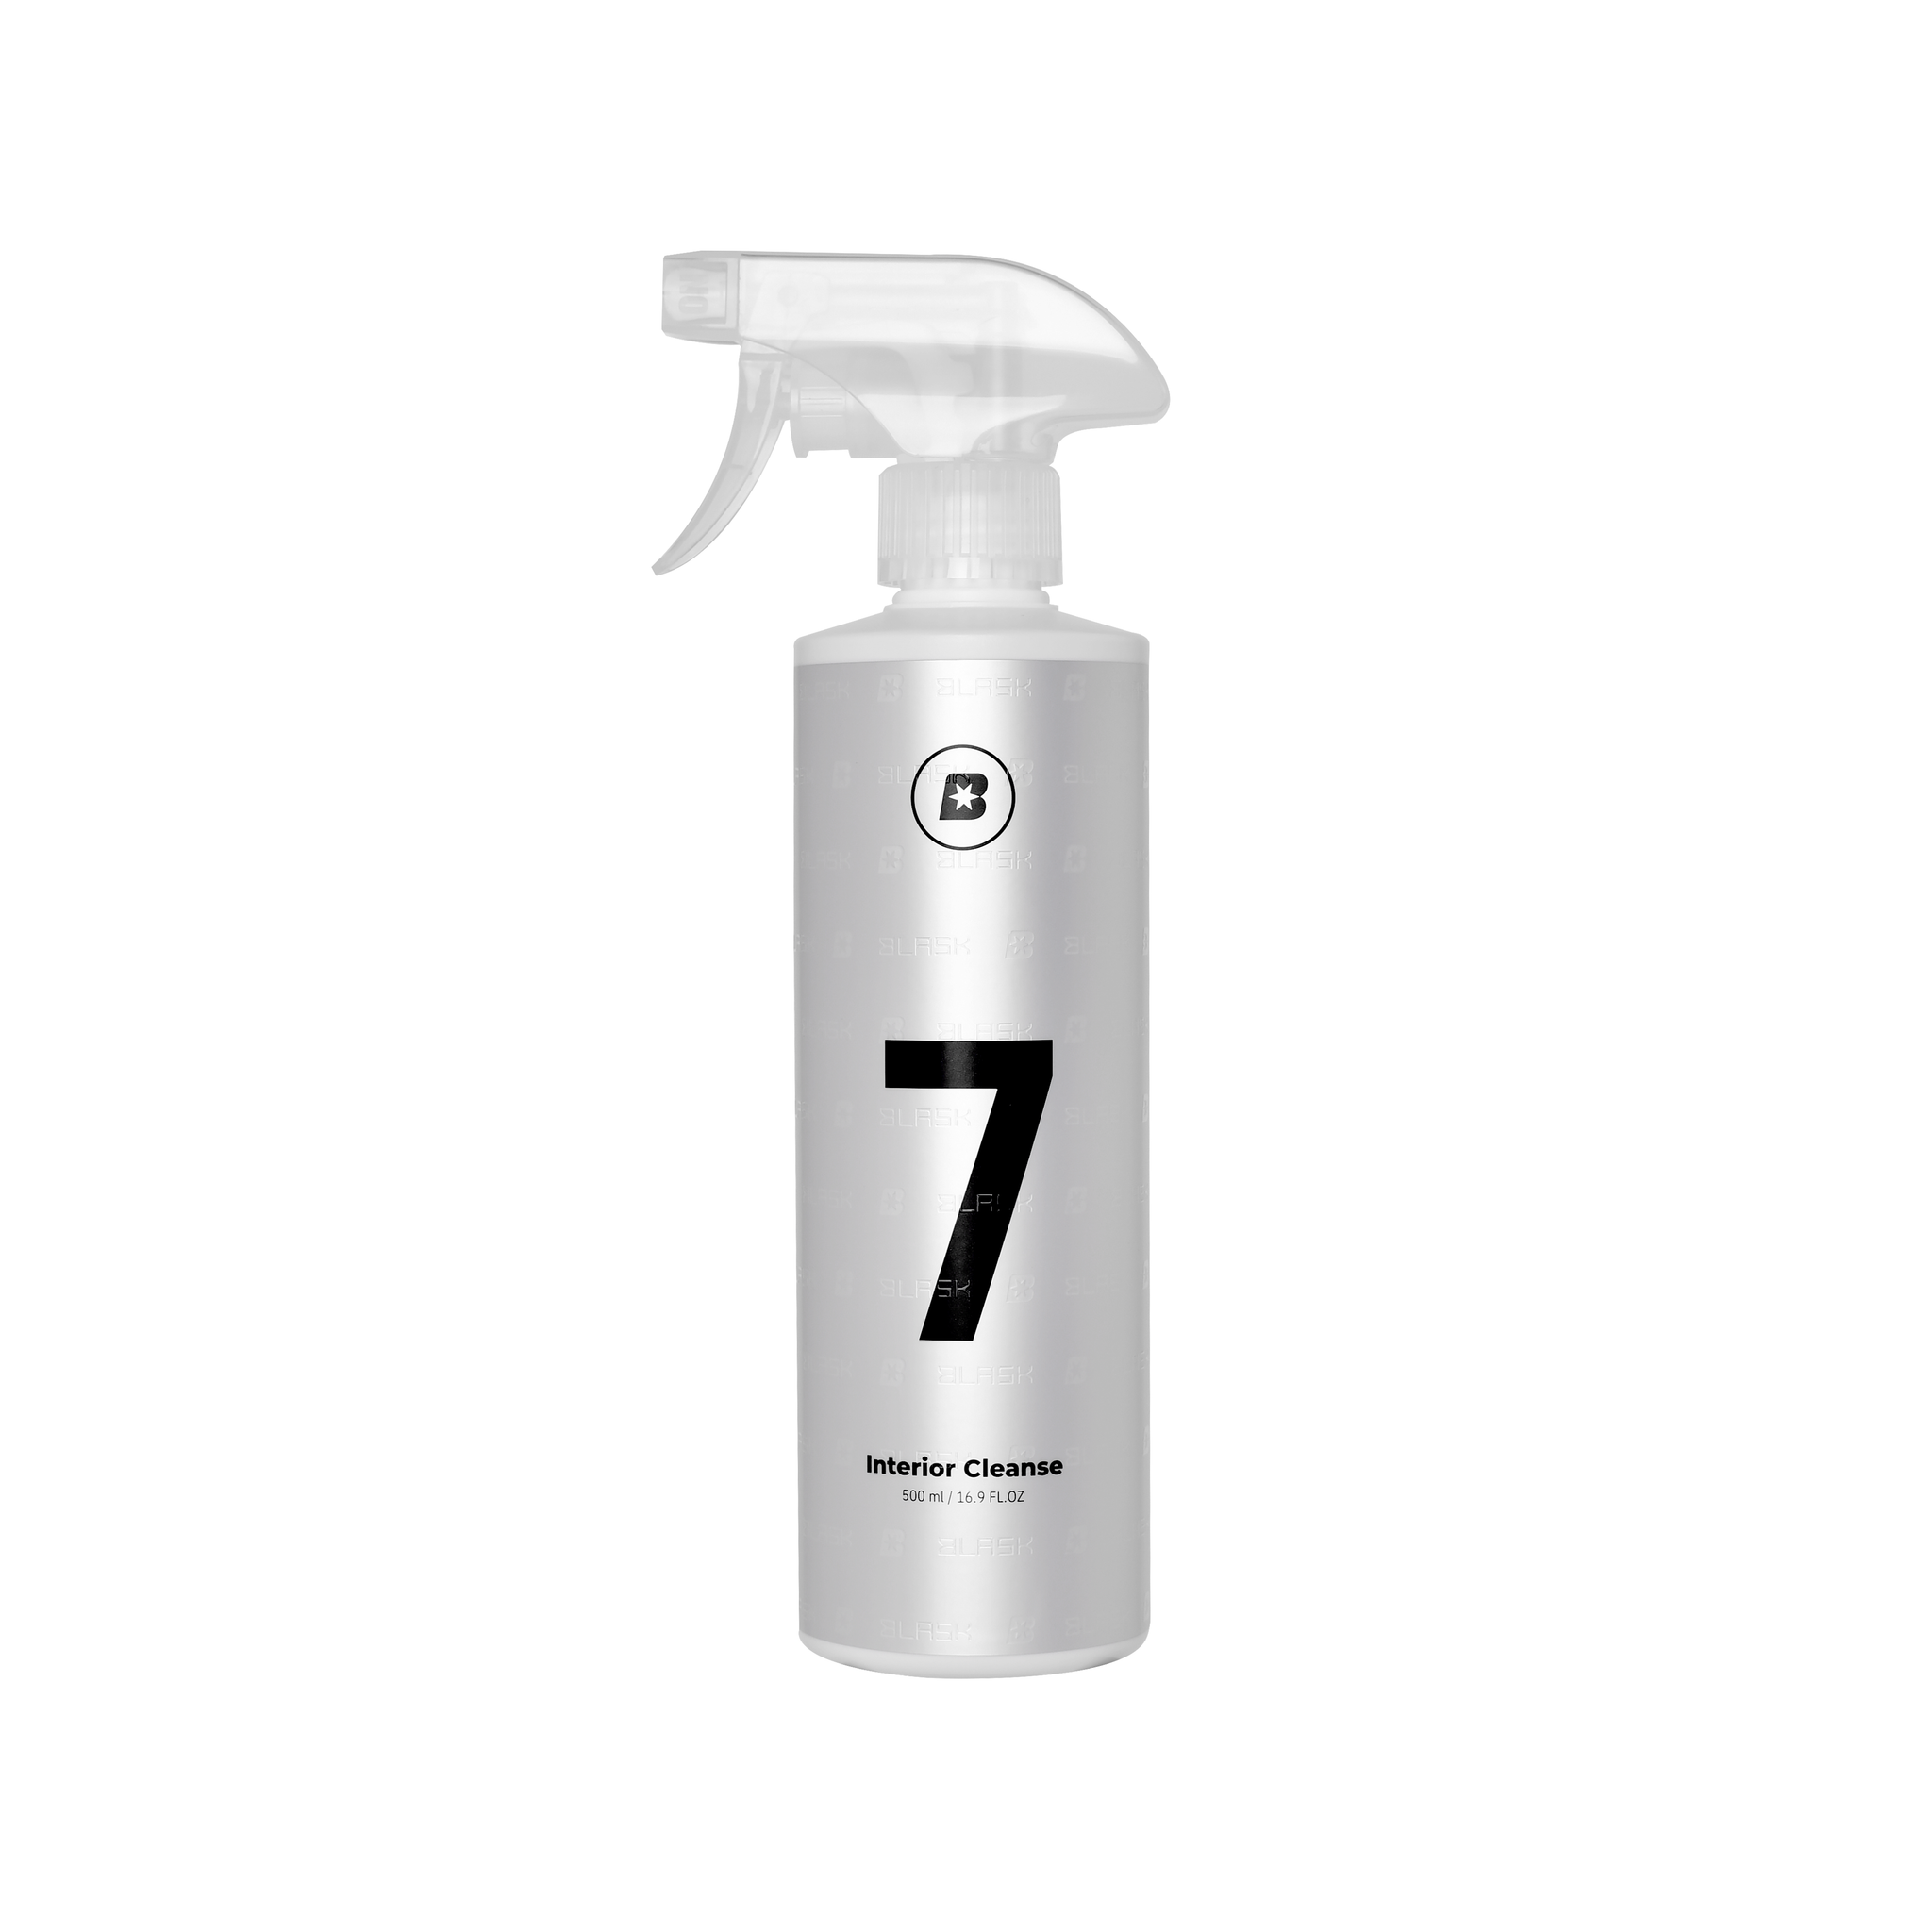 Rayno #7 Interior Cleanse - Interior Car Detailing Product